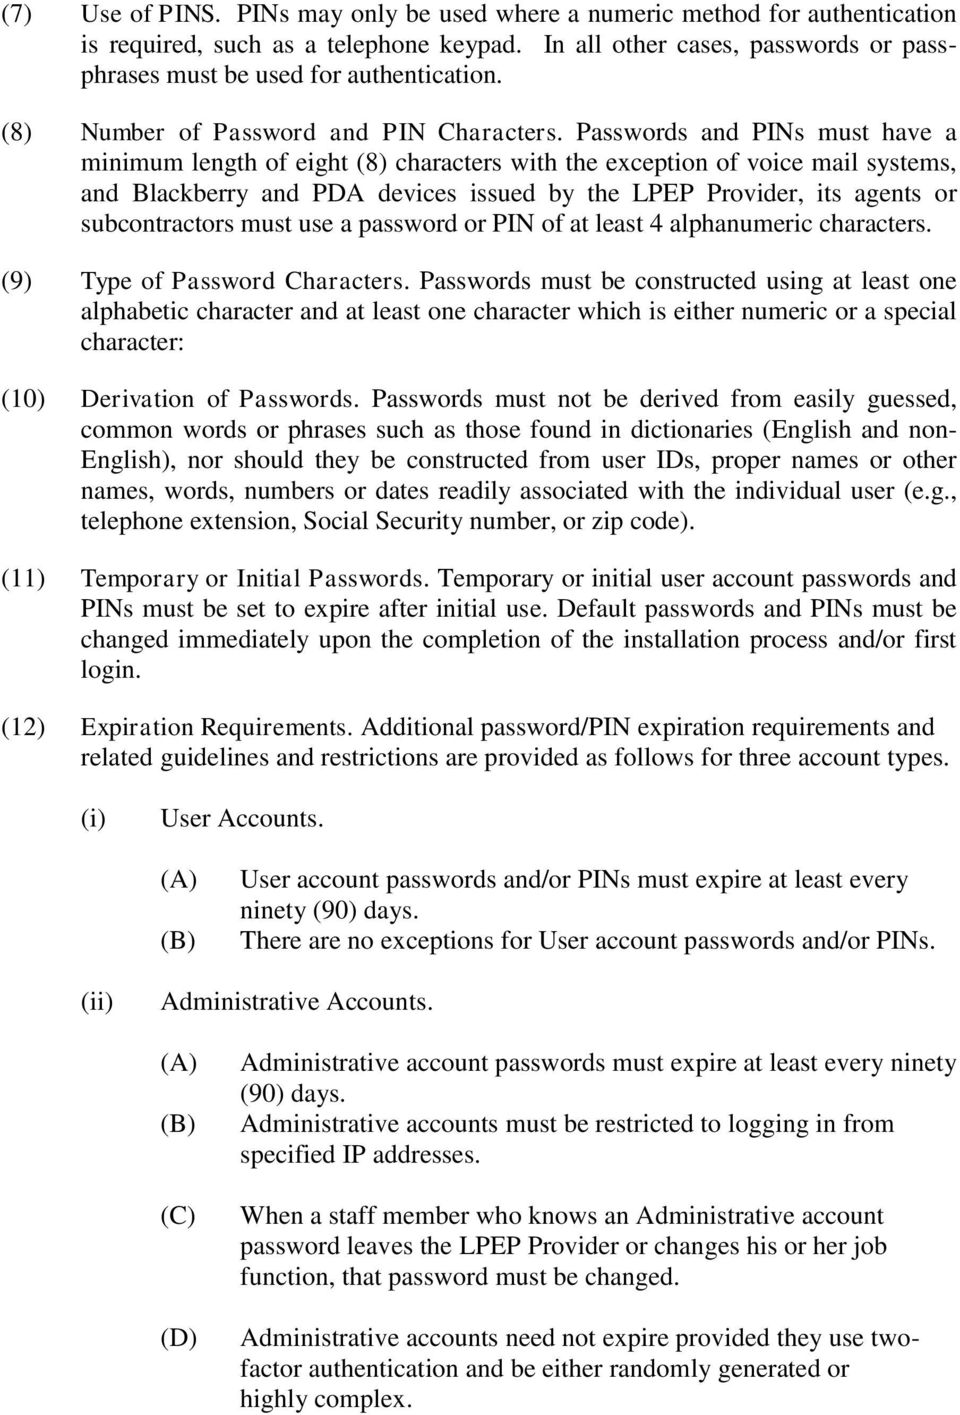 Passwords and PINs must have a minimum length of eight (8) characters with the exception of voice mail systems, and Blackberry and PDA devices issued by the LPEP Provider, its agents or